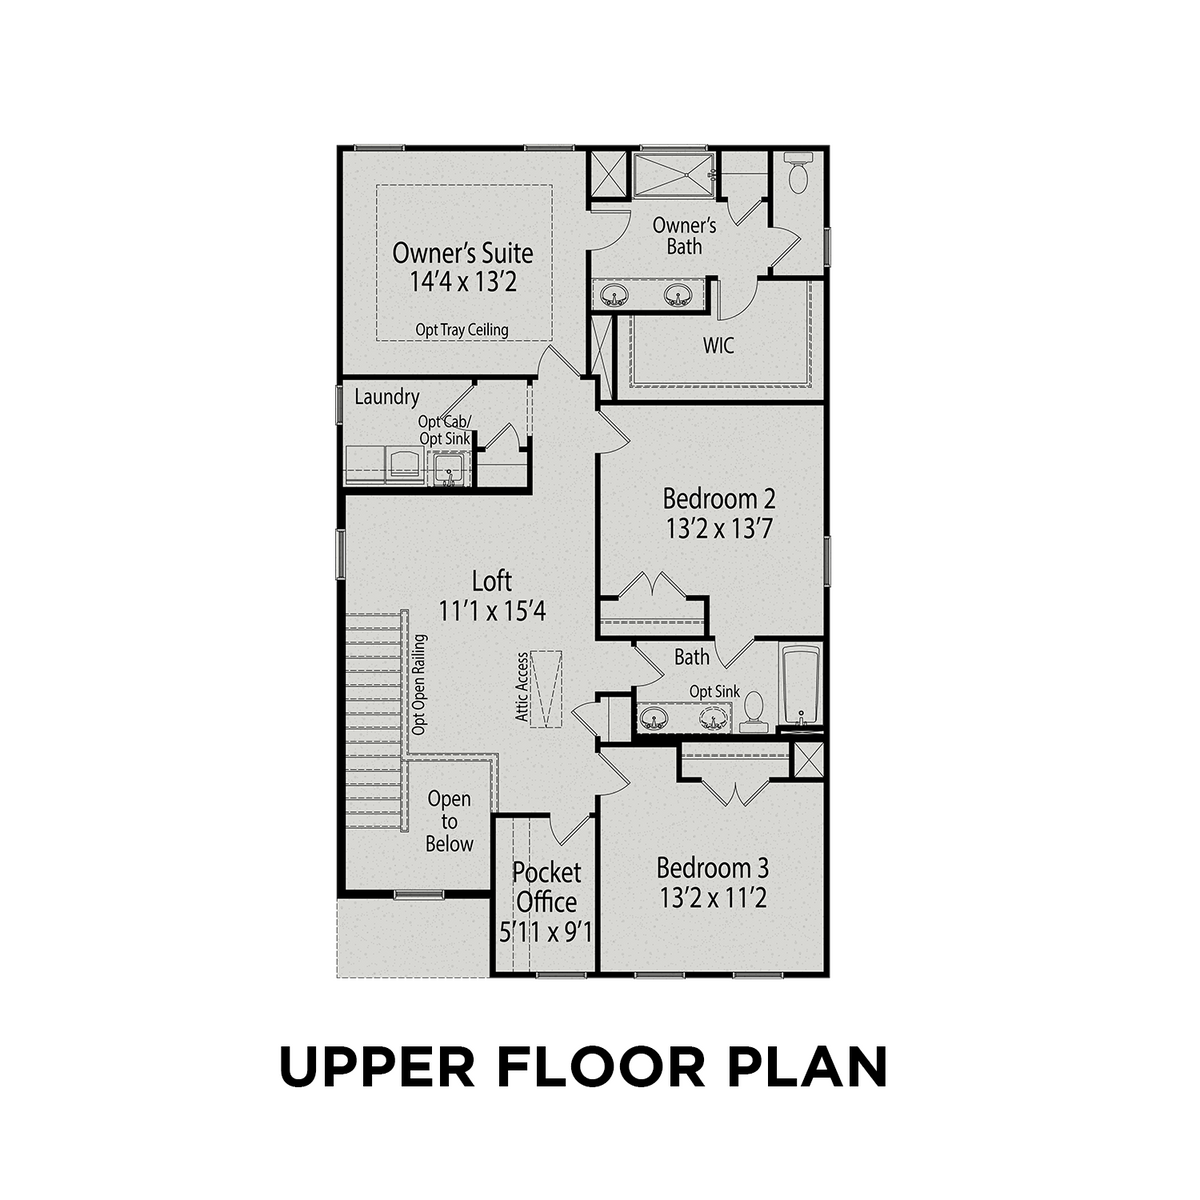 2 - The Gavin A floor plan layout for 59 Grassy Ridge Court in Davidson Homes' Beverly Place community.